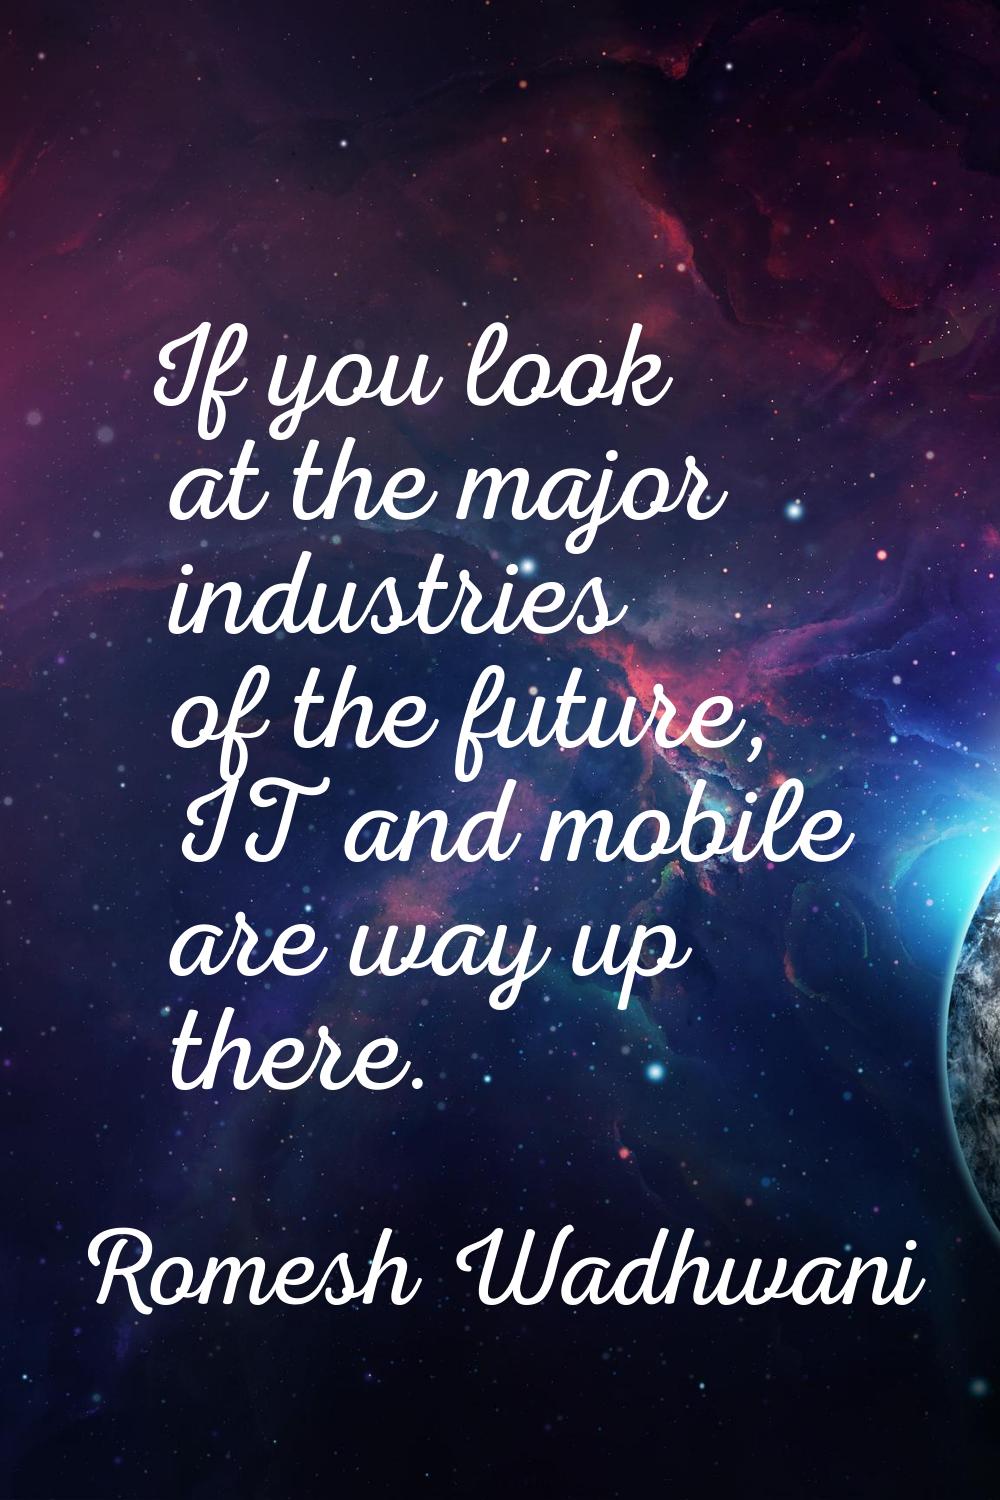 If you look at the major industries of the future, IT and mobile are way up there.